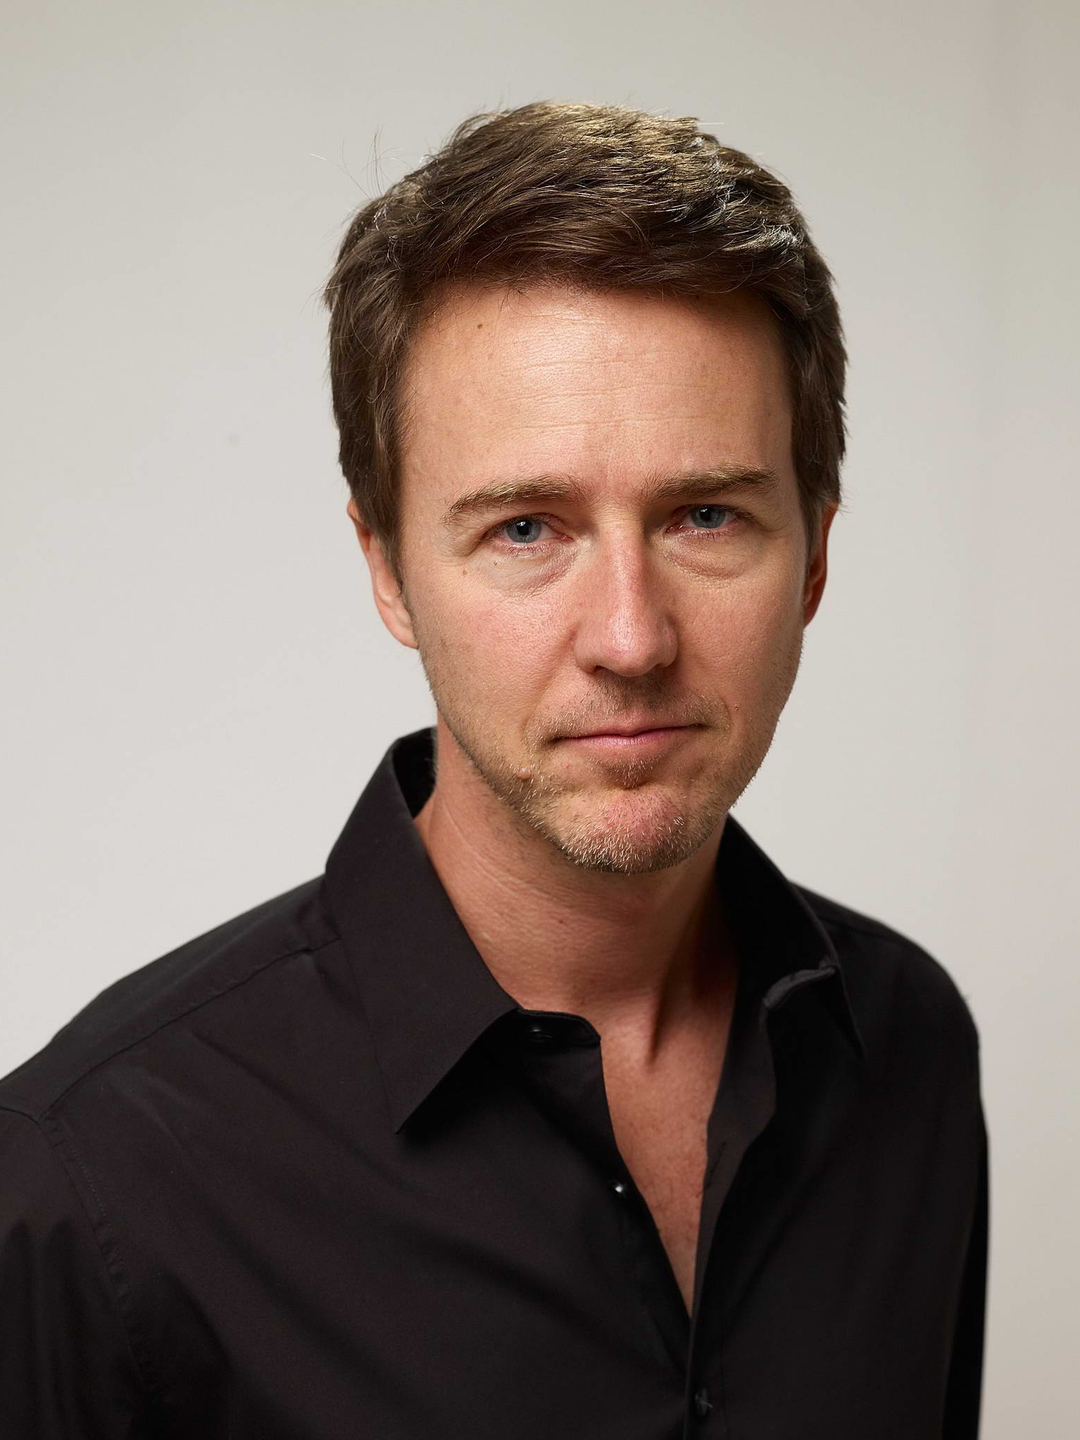 Edward Norton how did he became famous